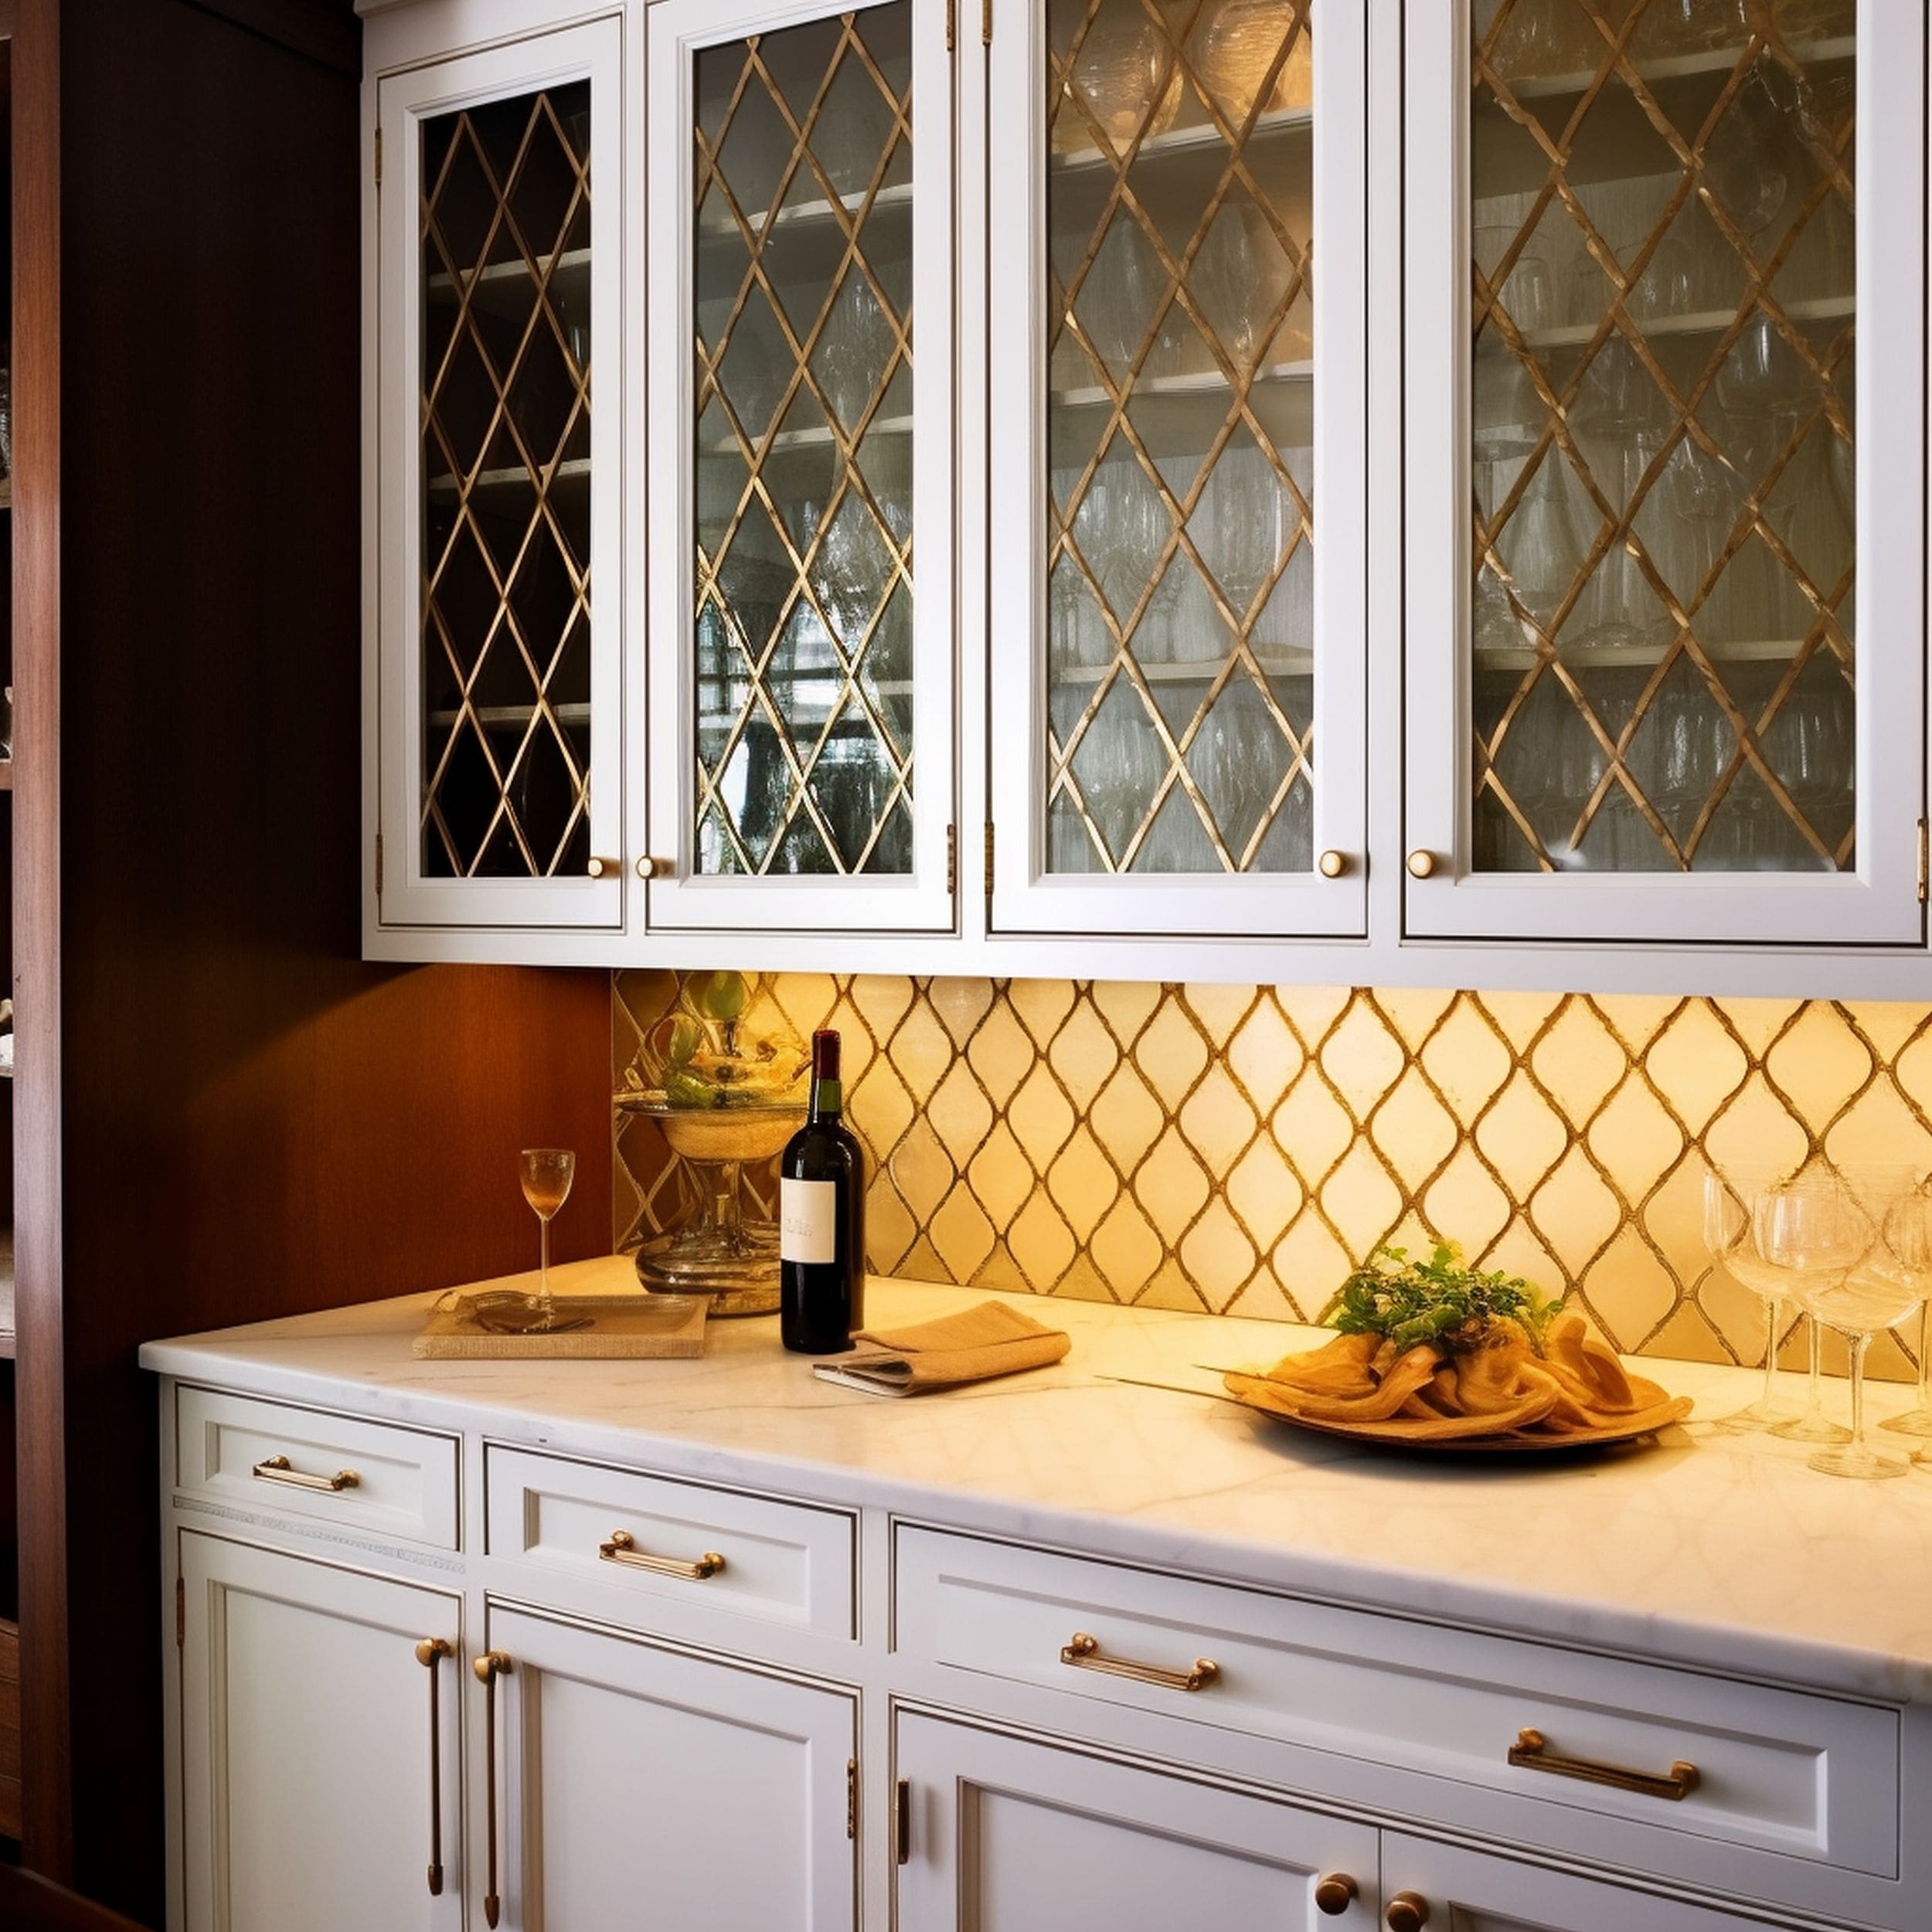 Butler Pantry With Diamond Patterns